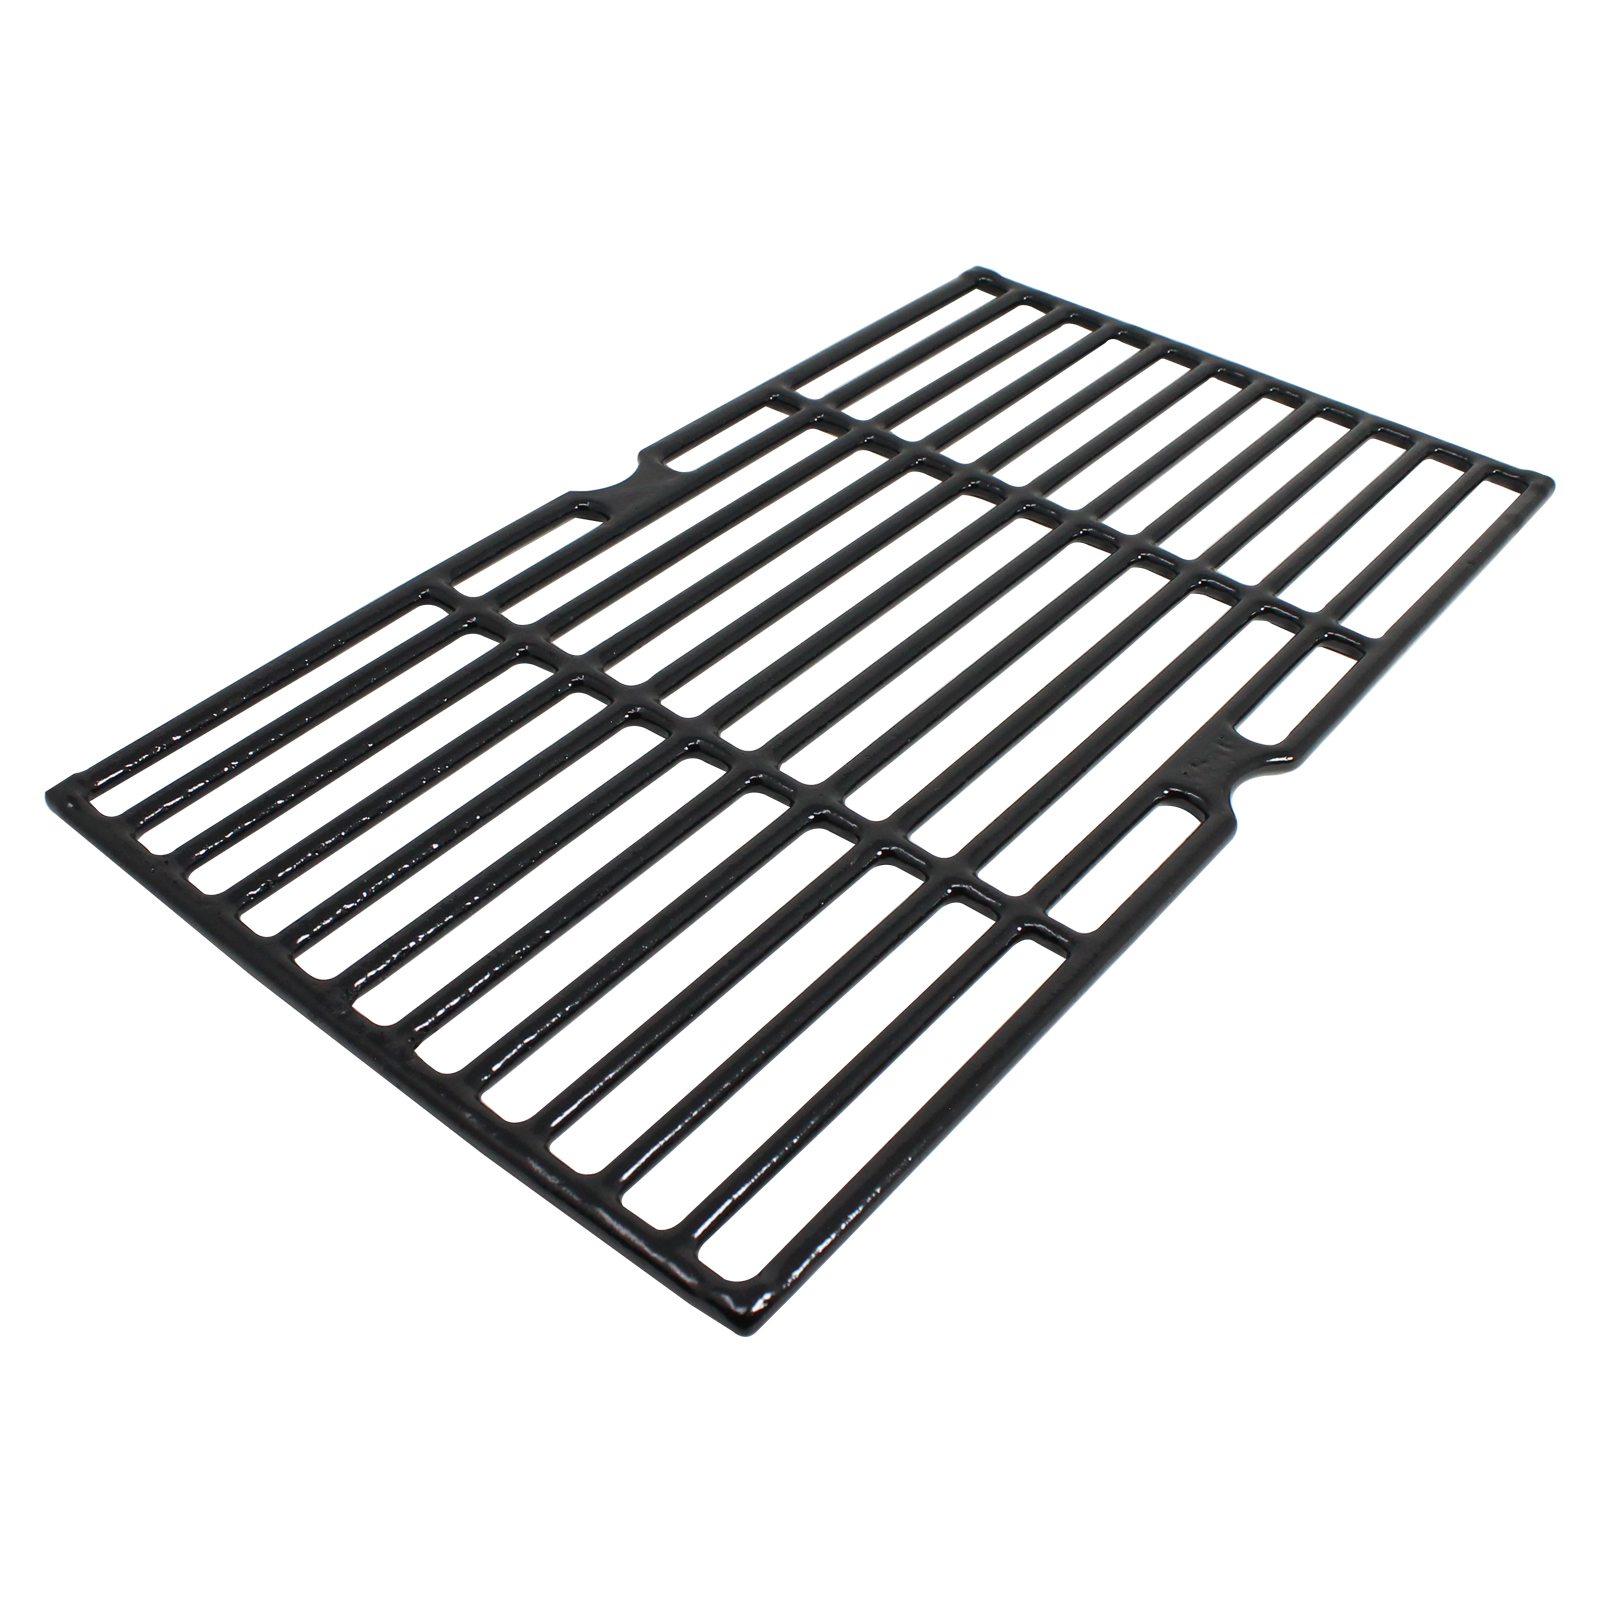 3-Pack BBQ Grill Cooking Grates Replacement Parts for Broil King 987747 - Compatible Barbeque Cast Iron Grid 16 3/4" - image 4 of 4